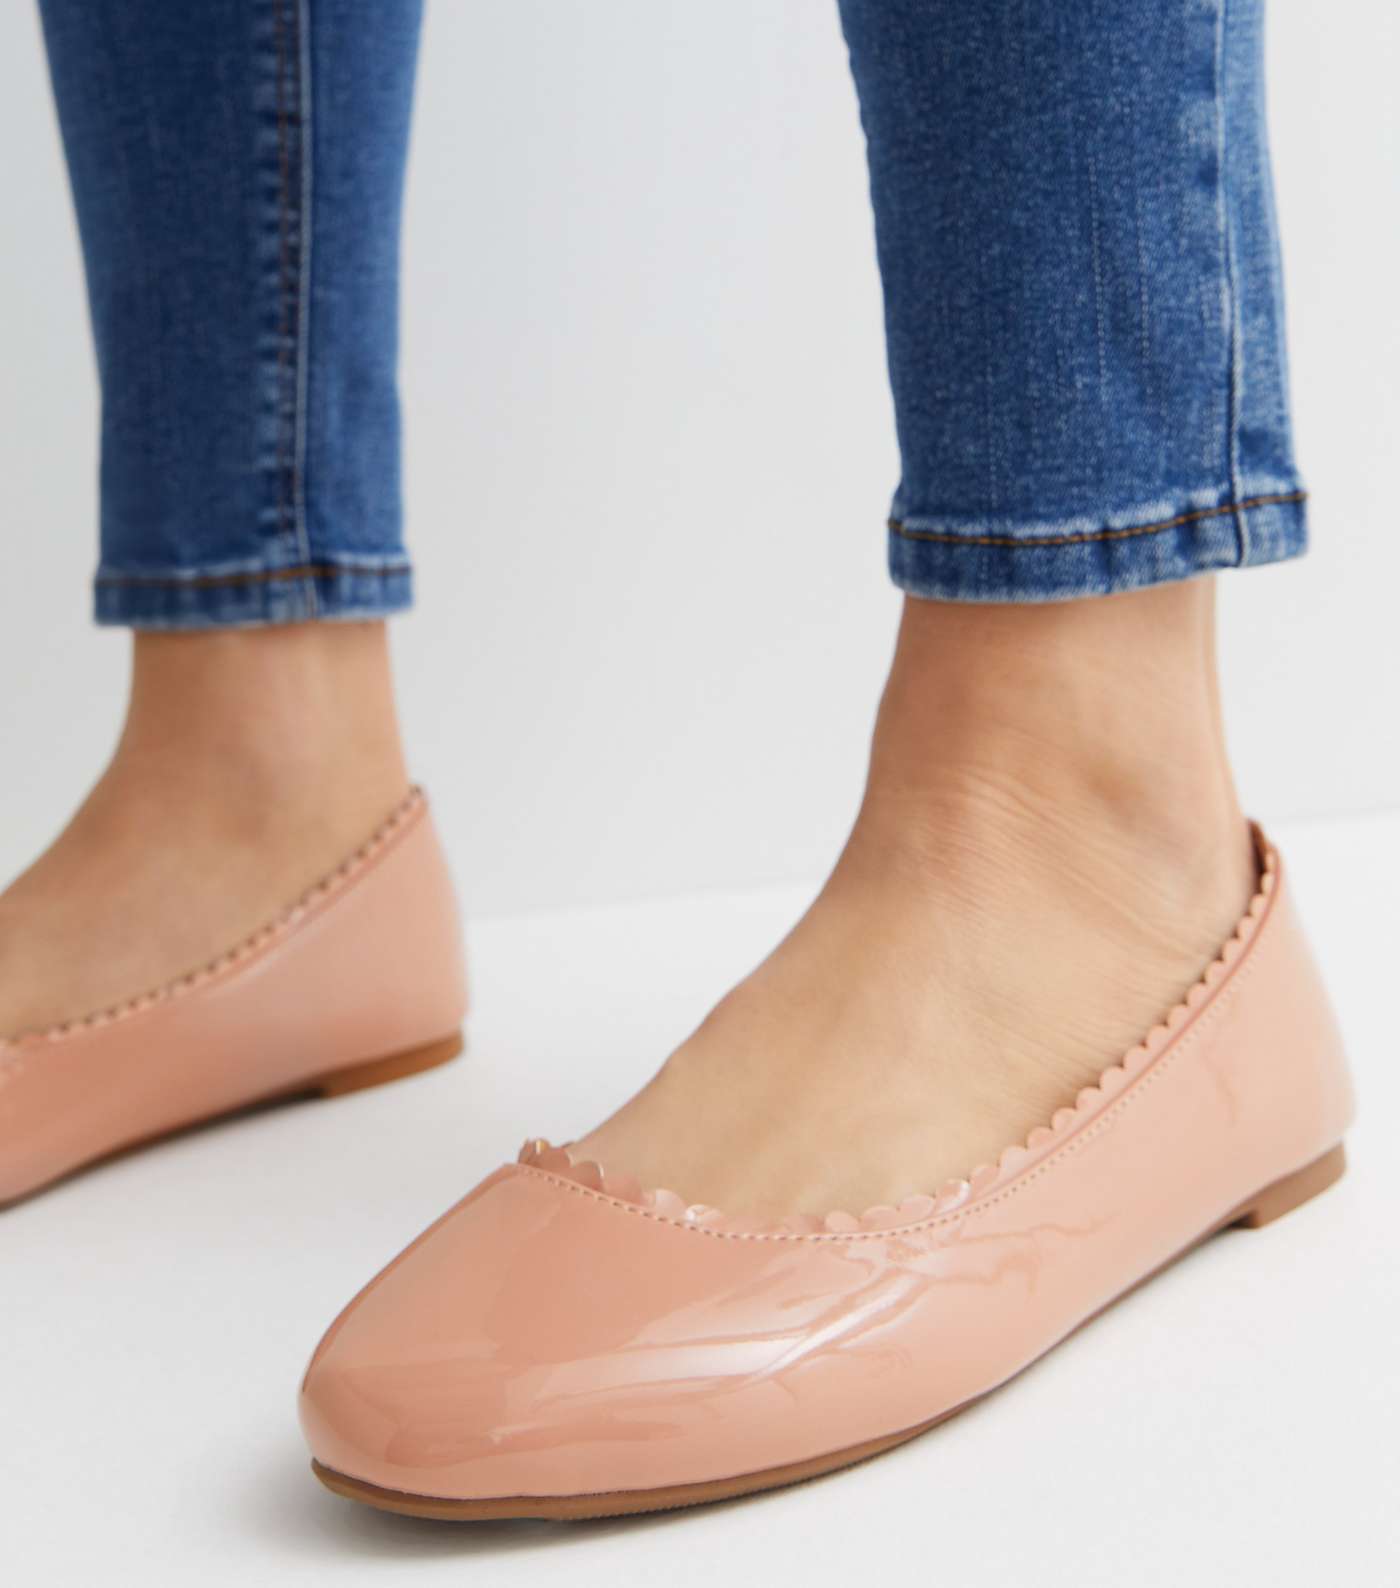 Extra Wide Fit Pale Pink Patent Scallop Ballerina Pumps Image 2